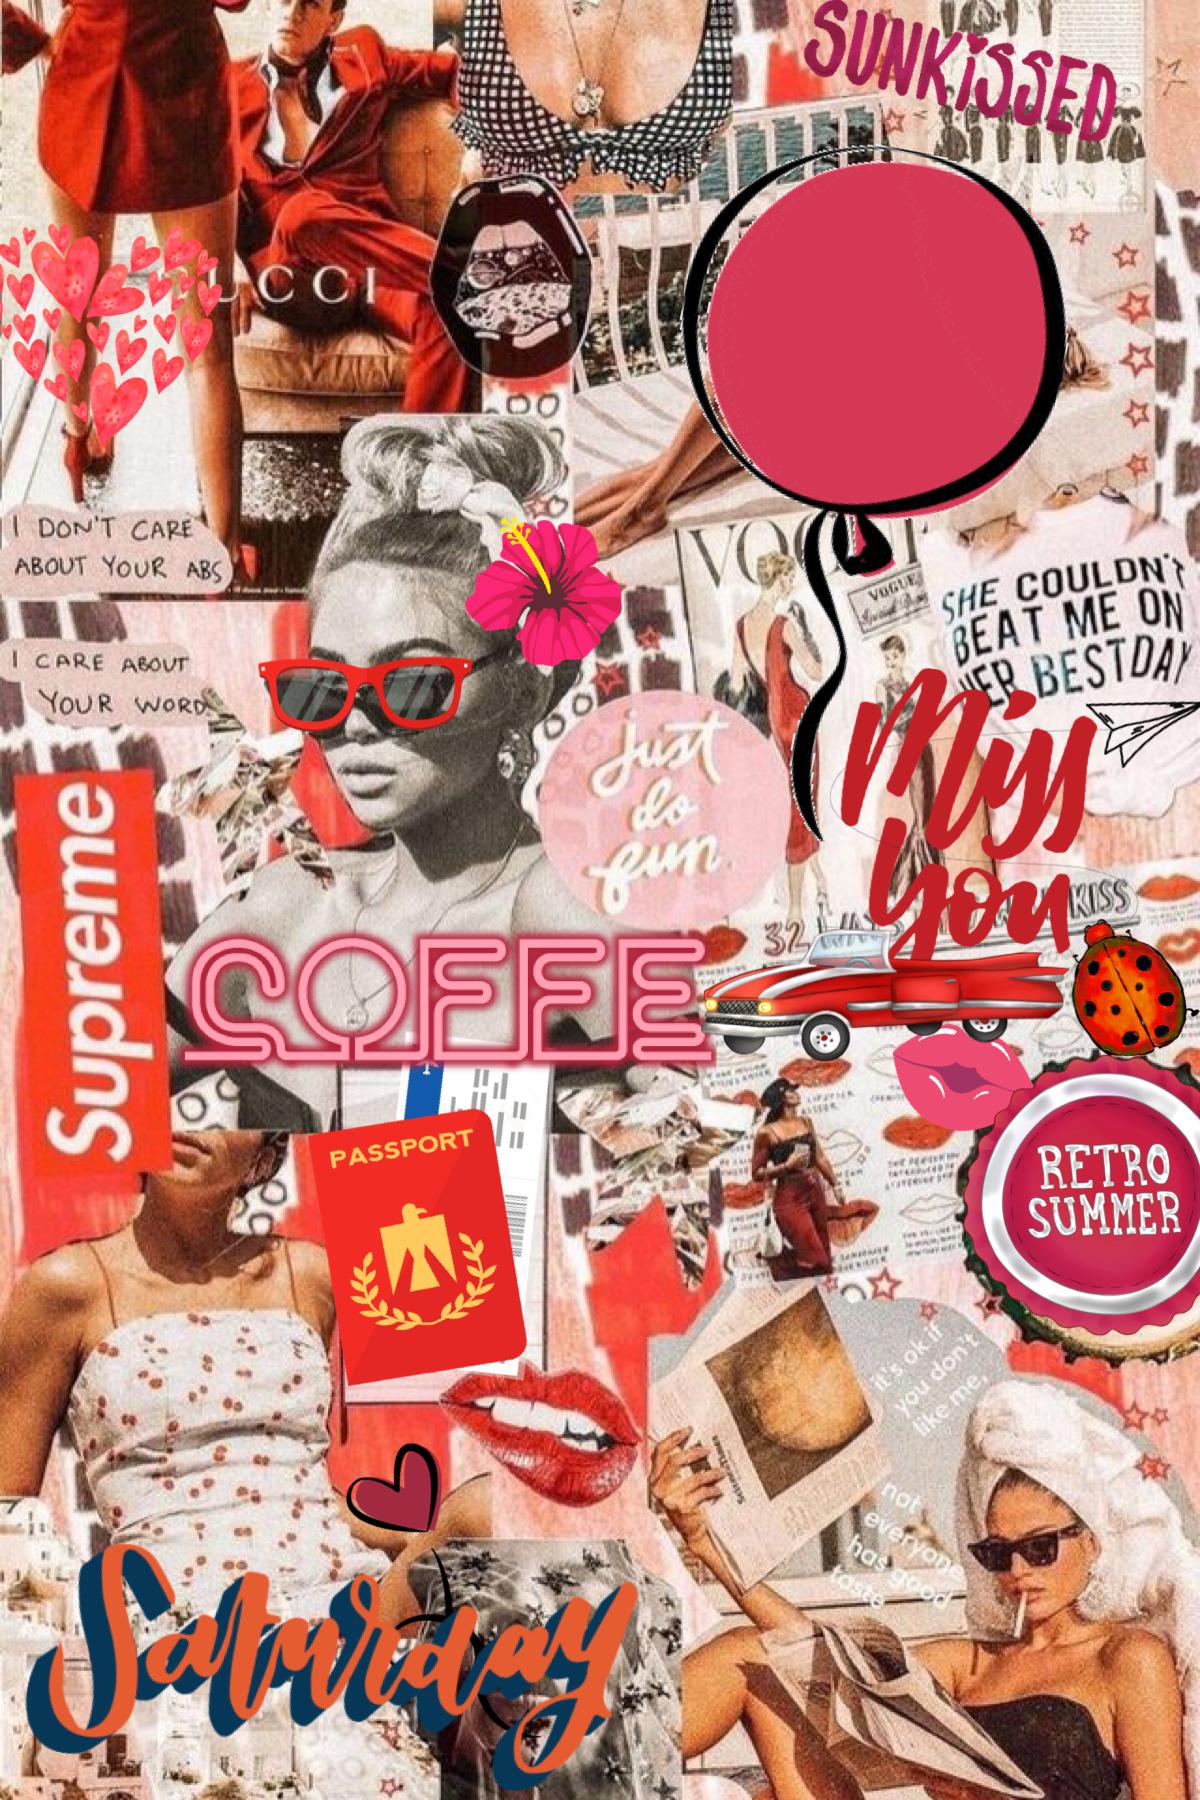 Collage by cool60